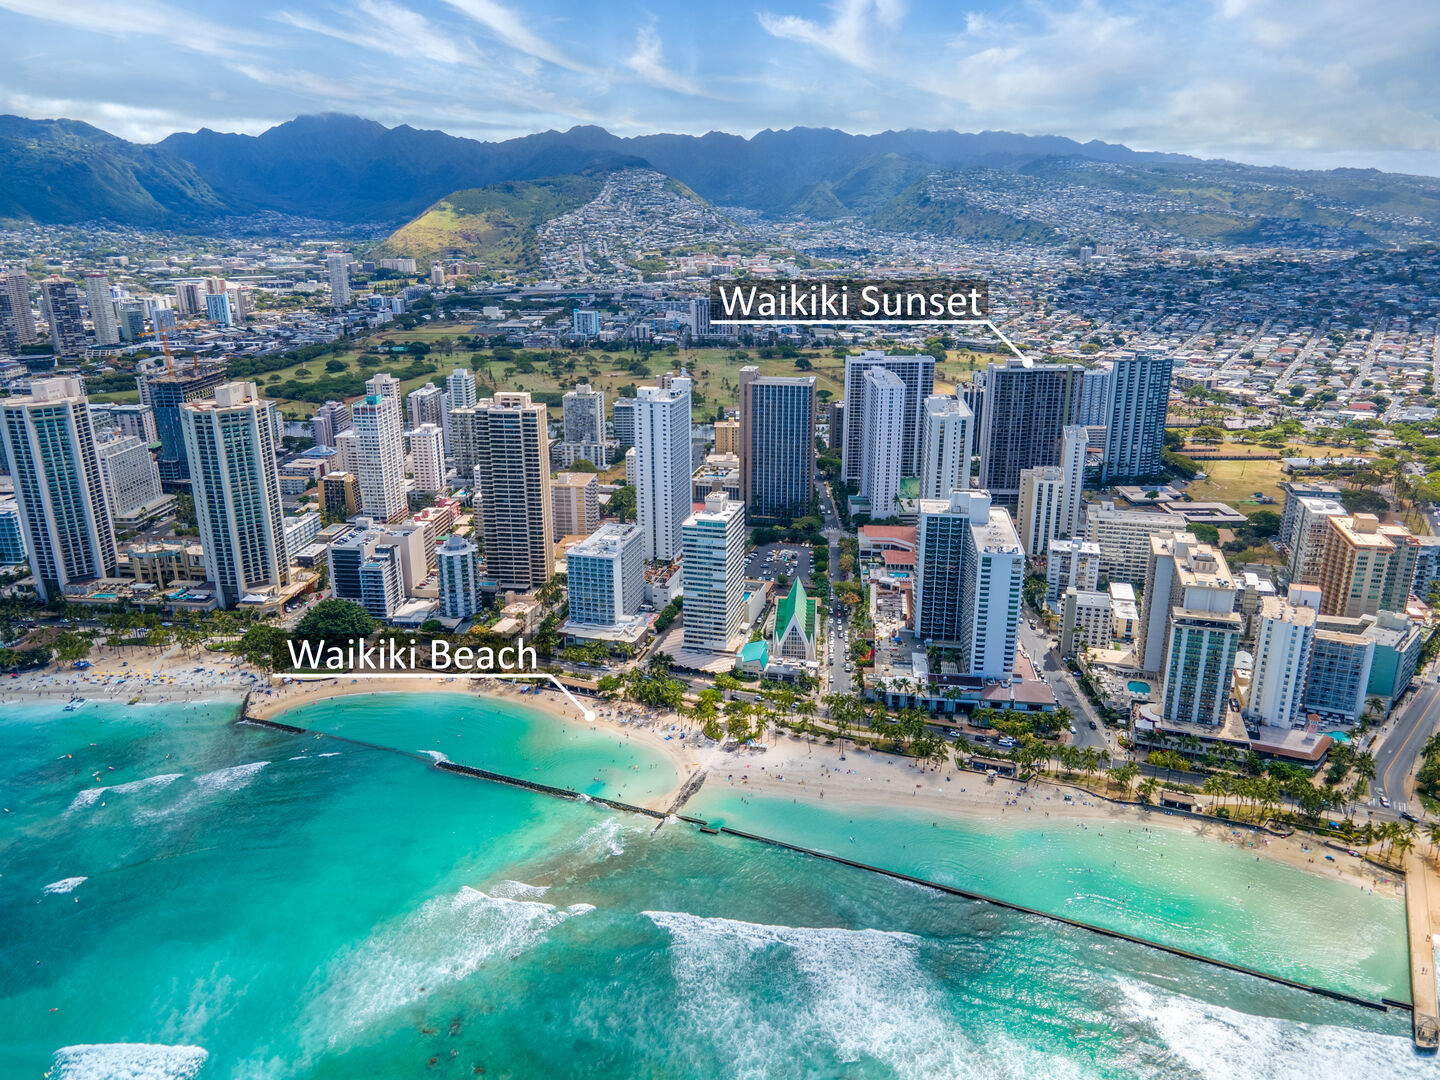 The Waikiki Sunset is walking distance to the beach